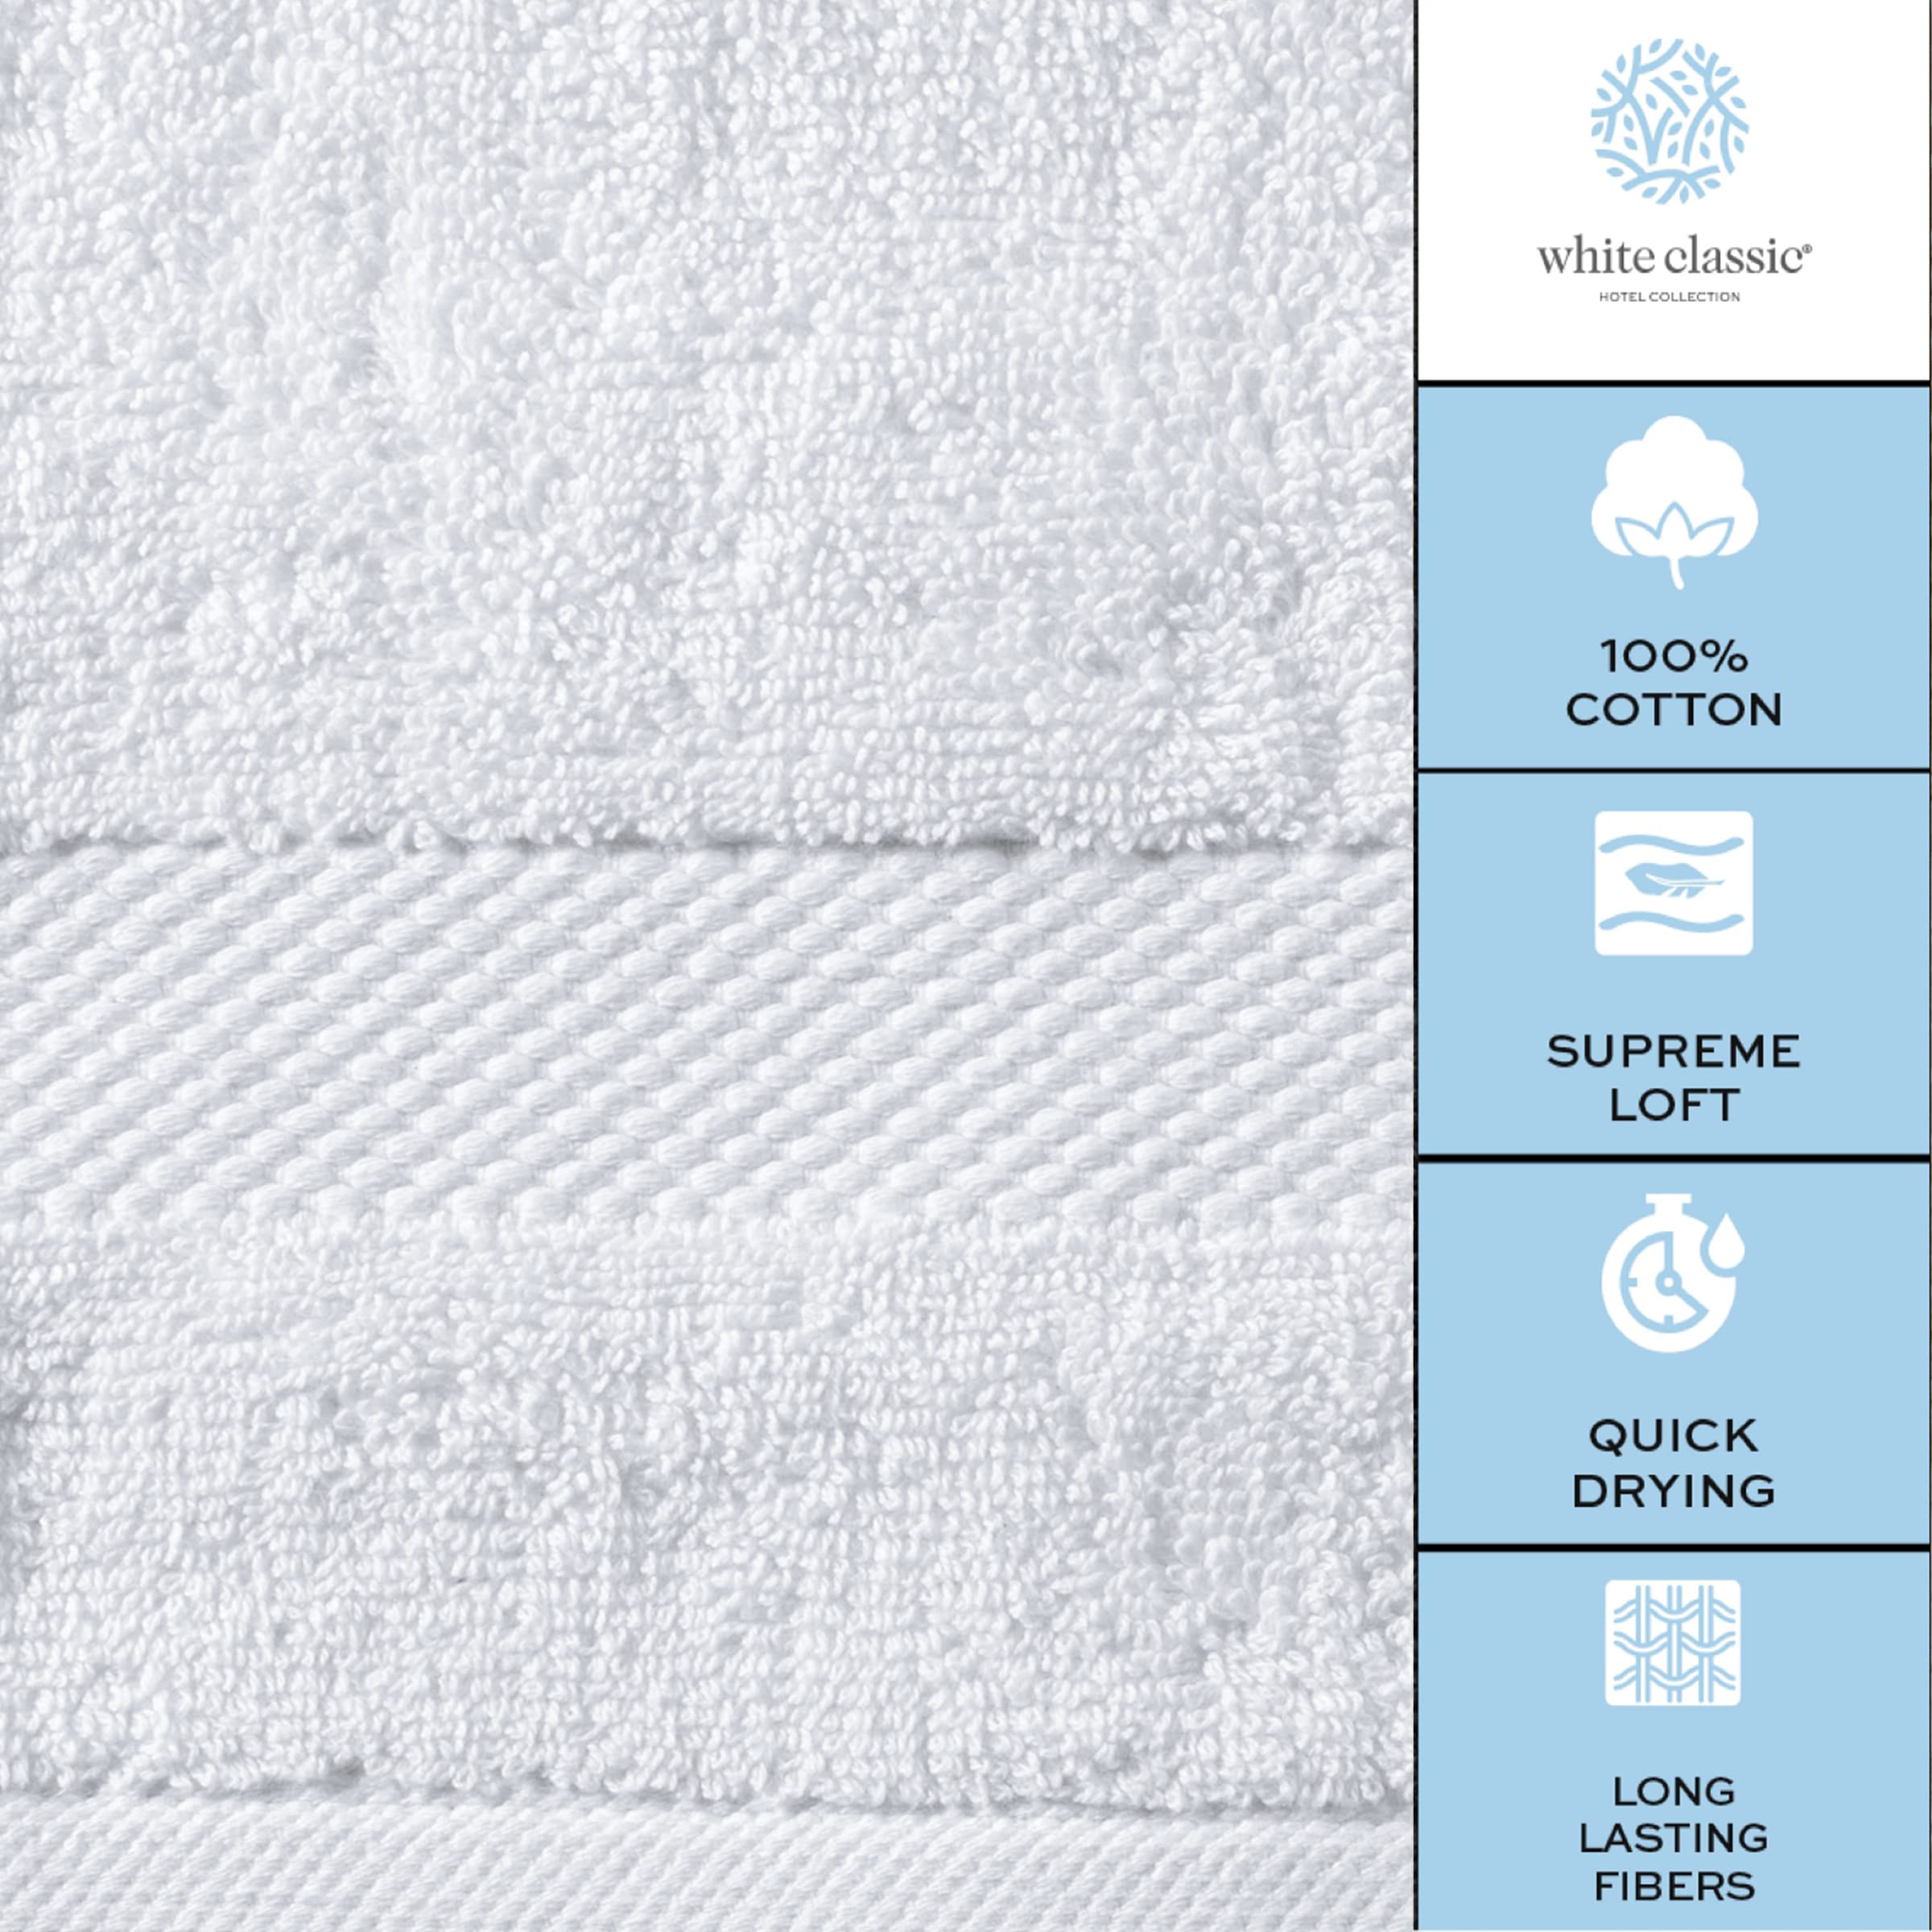 Luxury 8 Piece Bath Towel Set White - 700 GSM Thick Combed Cotton Hotel Quality Towels - 2 Bath Towels, 2 Hand Towels, 4 Washcloths  - Like New